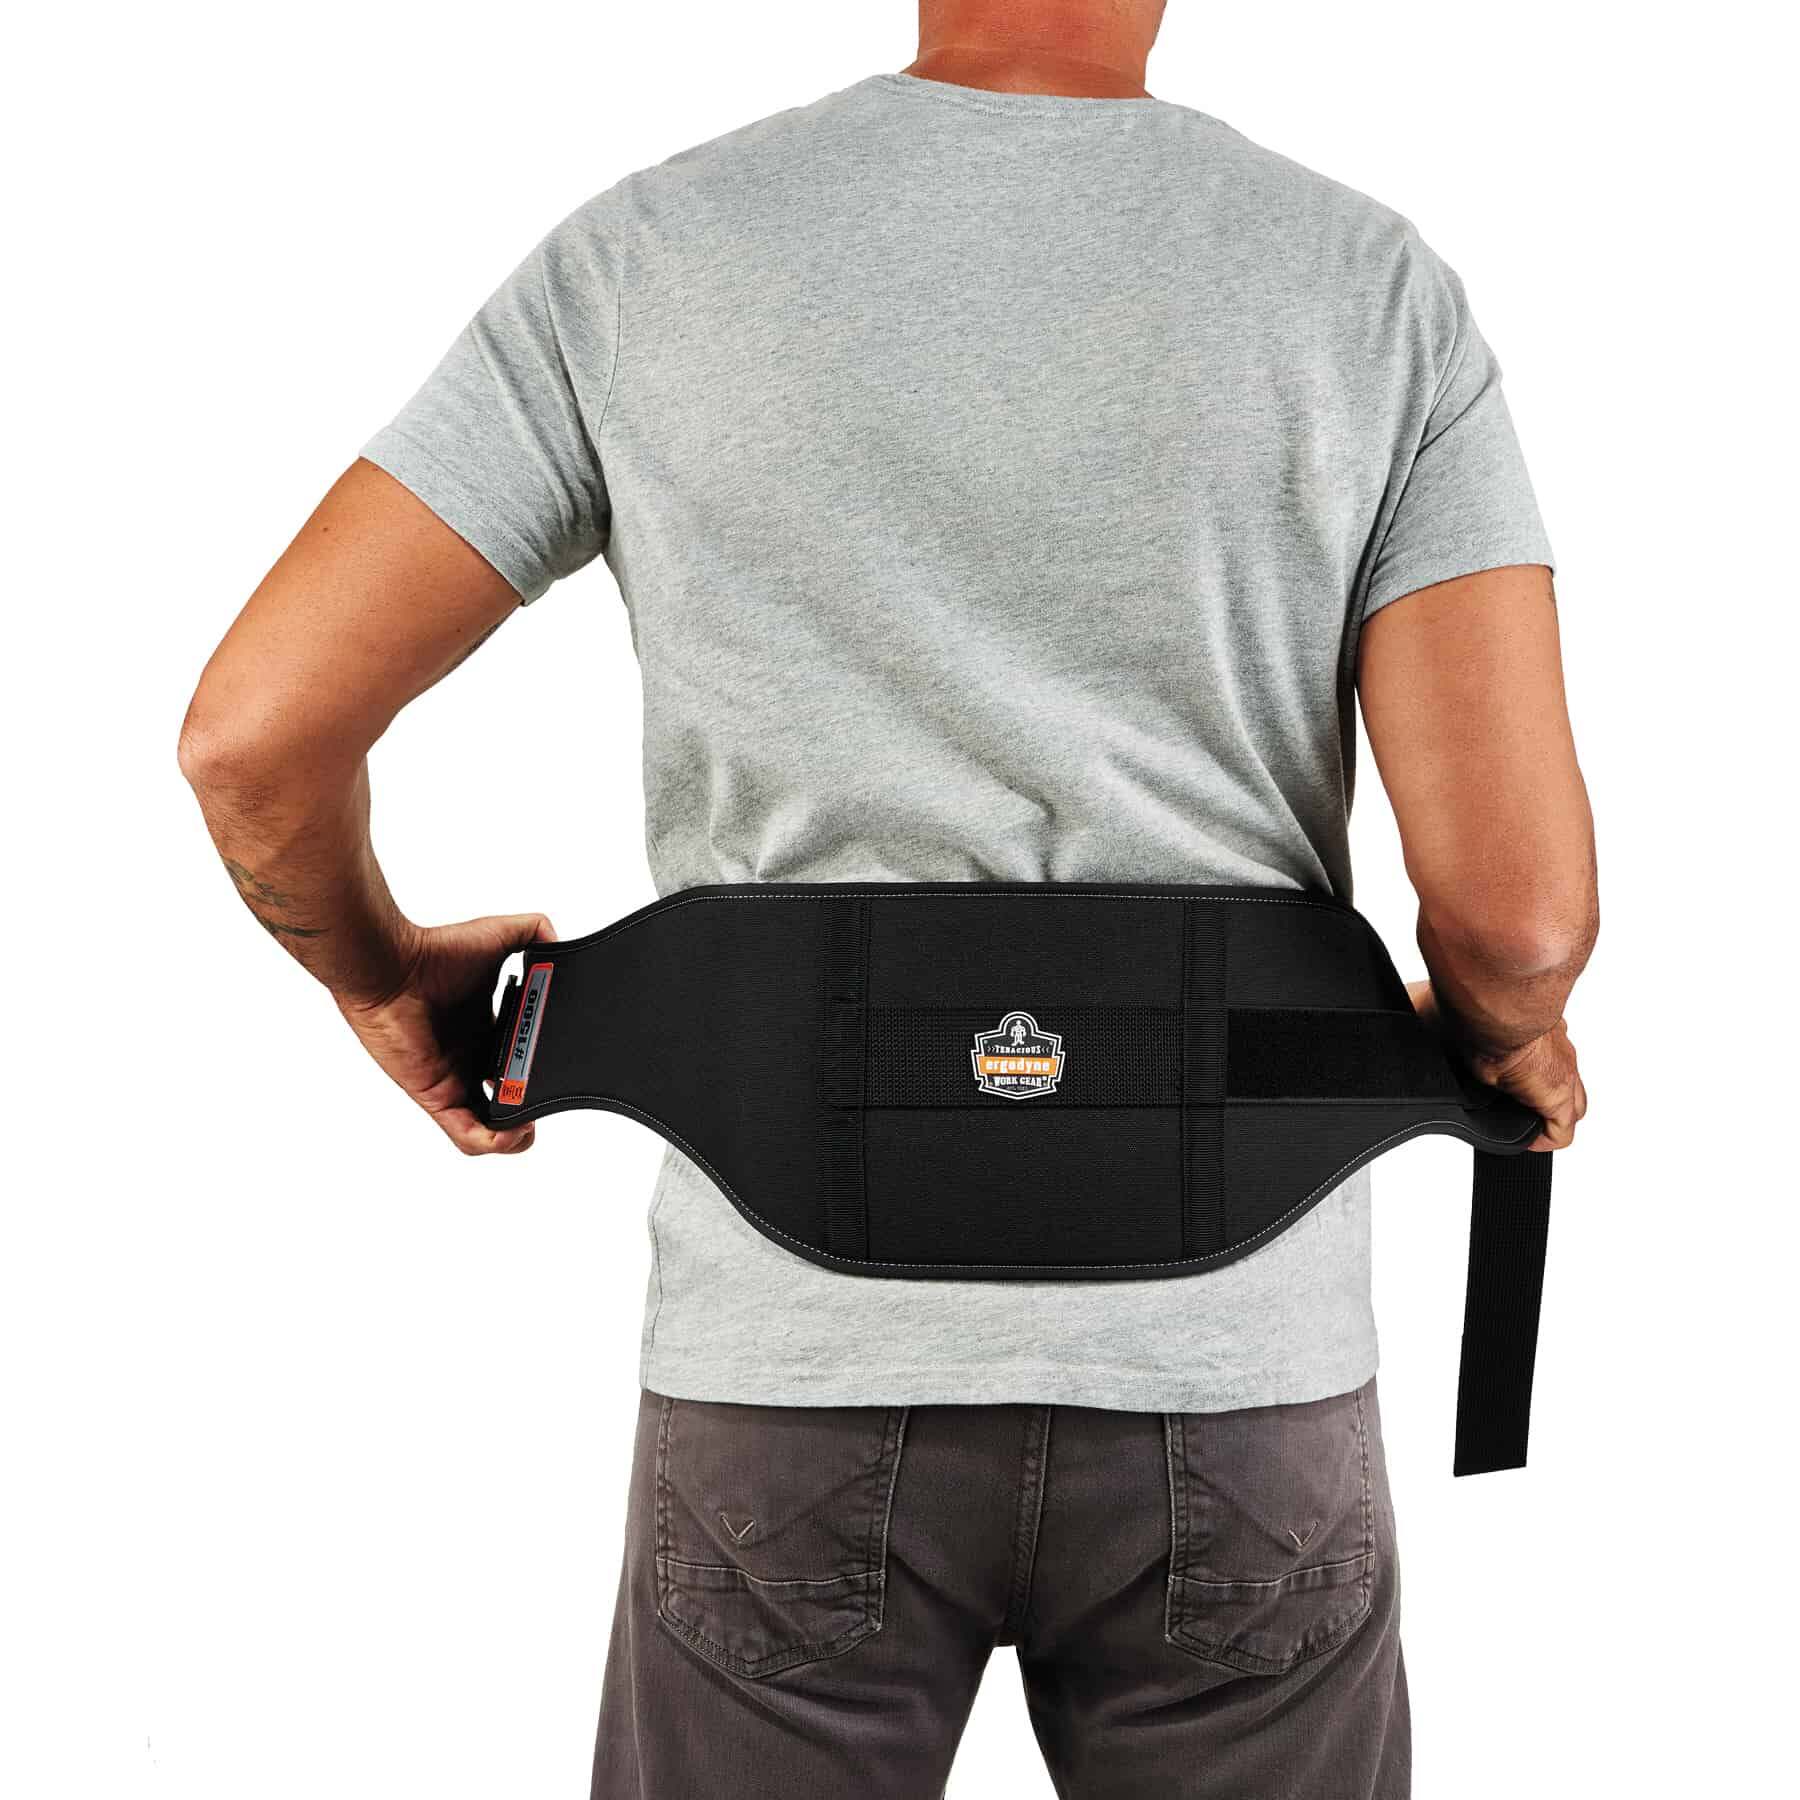 Weightlifting Style Back Support Brace